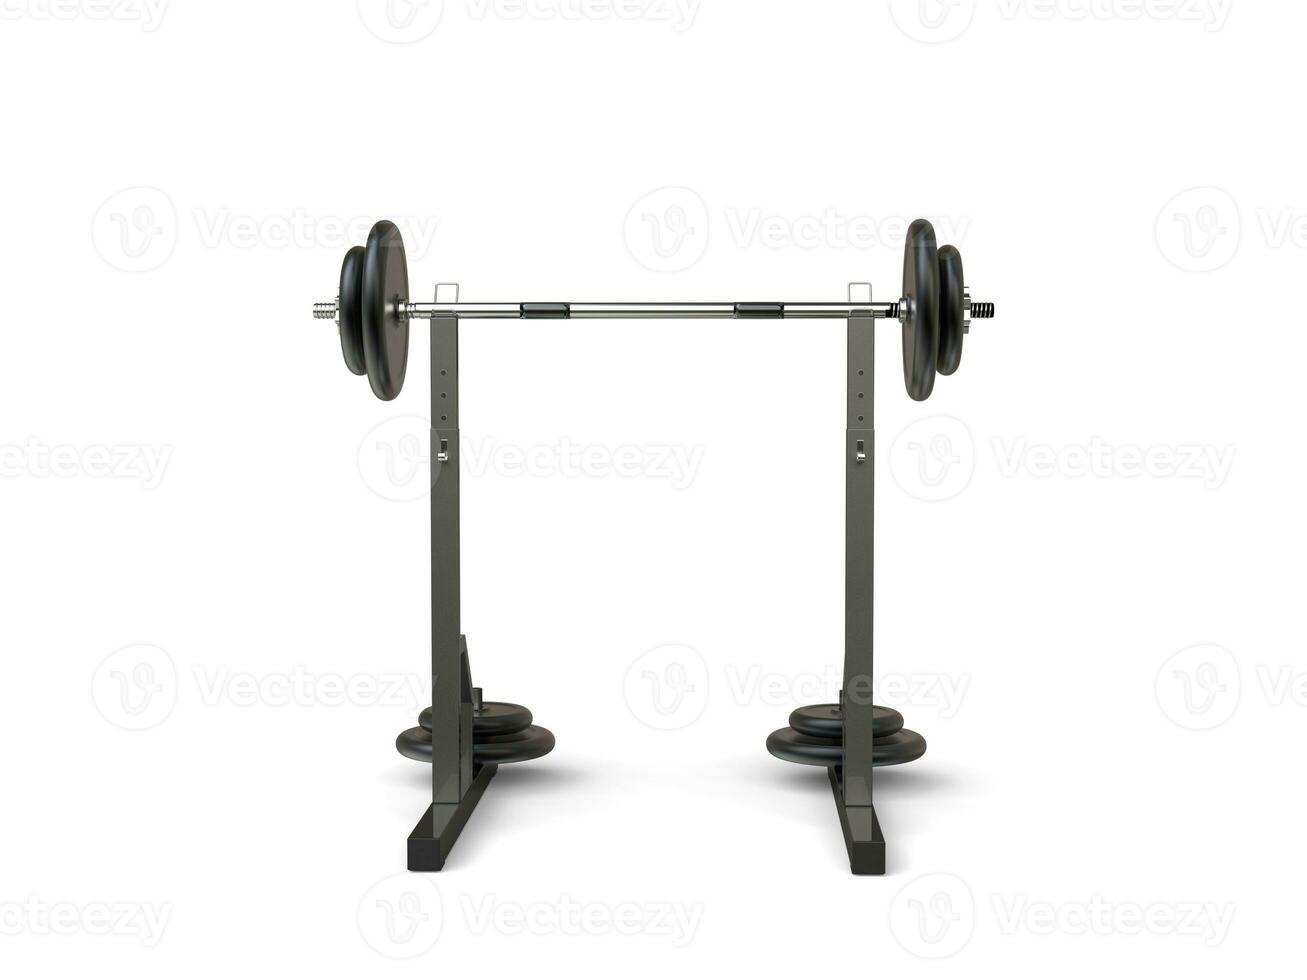 Big gym barbell weight on a stand - isolated on white background photo